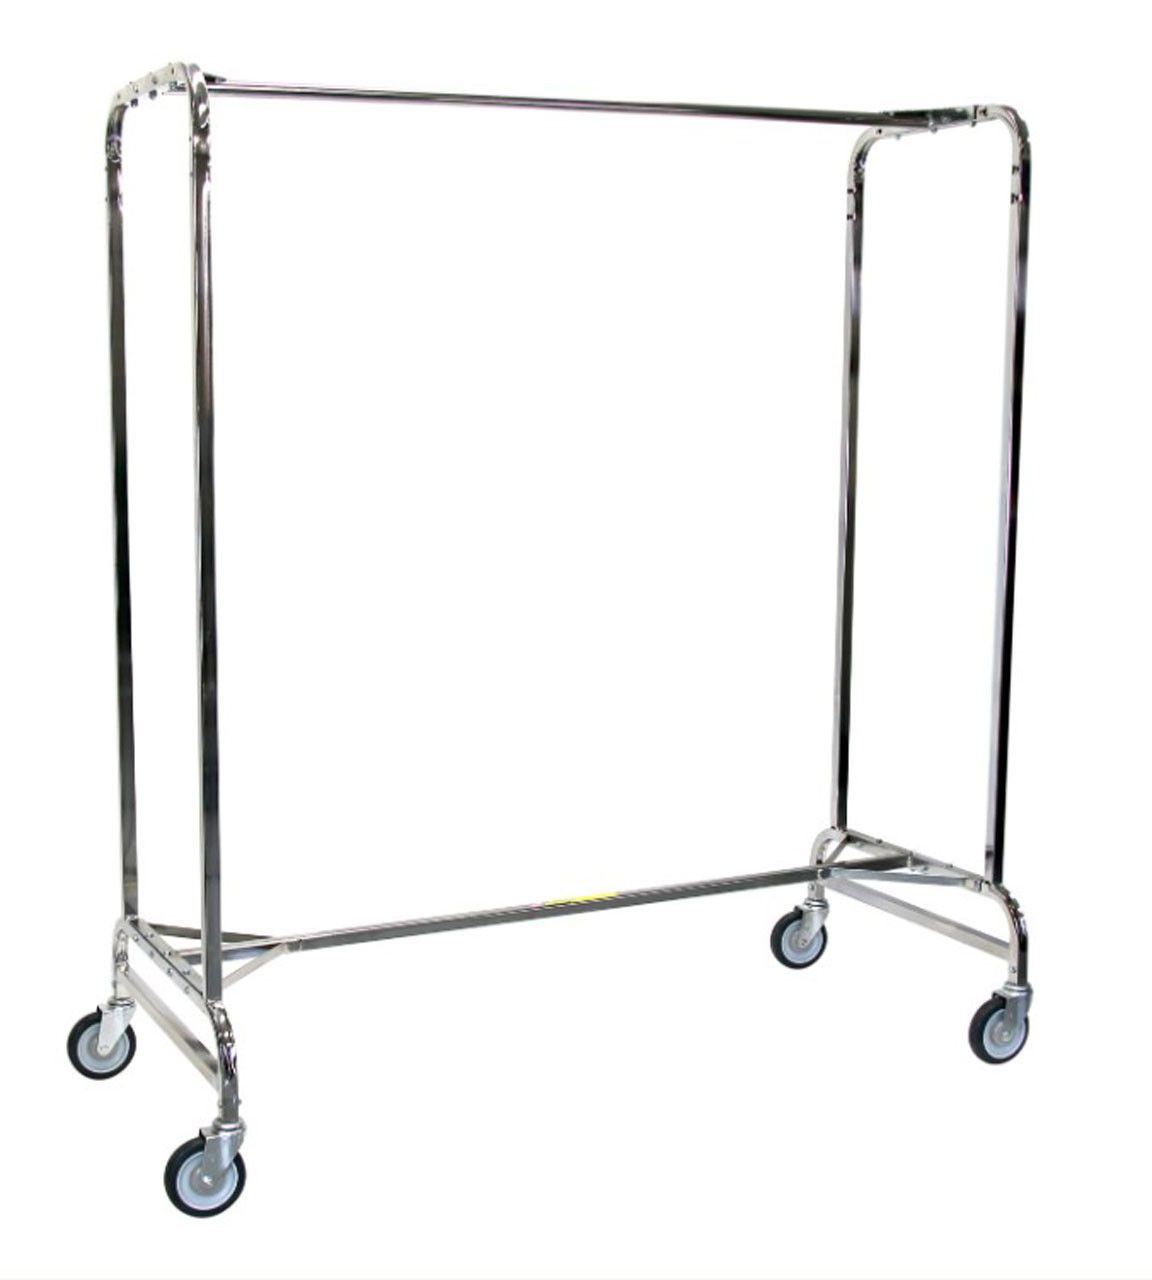 What is the weight capacity of the Heavy Duty Garment Rack?